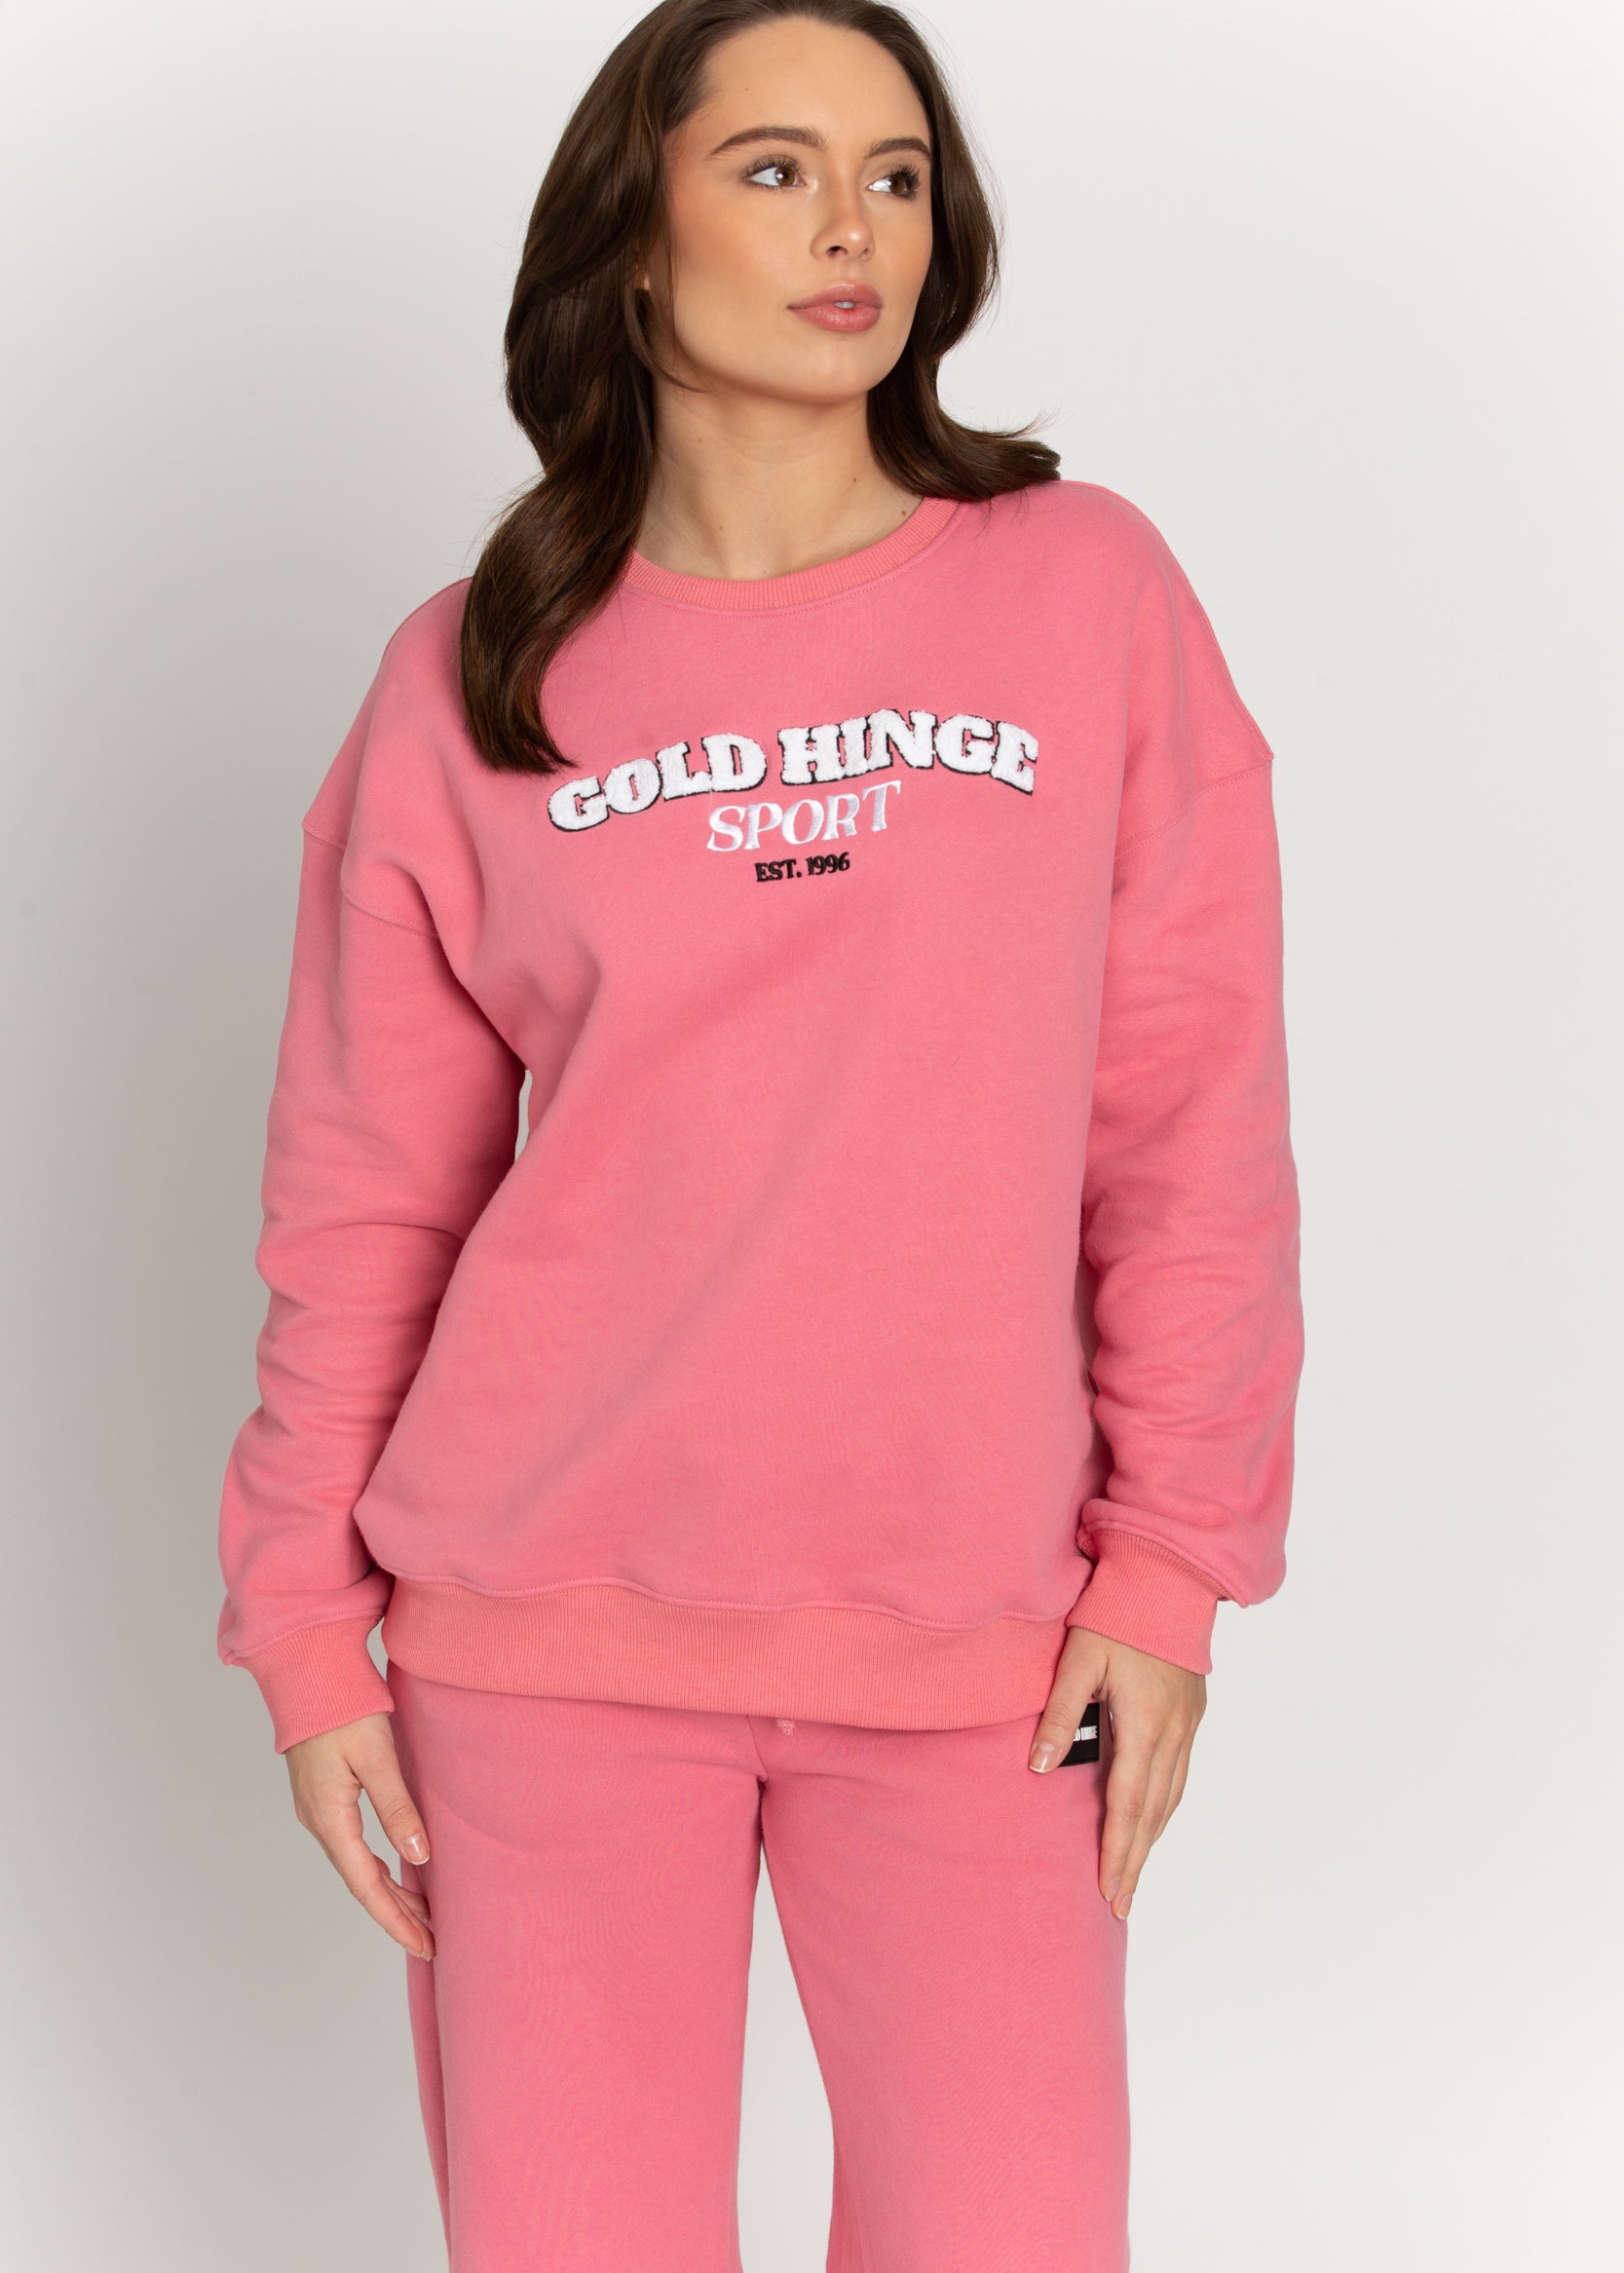 Upgrade your wardrobe with this Rouge GH Sport Sweatshirt. Featuring a fuzzy 3D lettering design, this classic piece can be layered with a bold jacket and beanie for colder weather, or be paired with a tennis skirt for a more casual look.